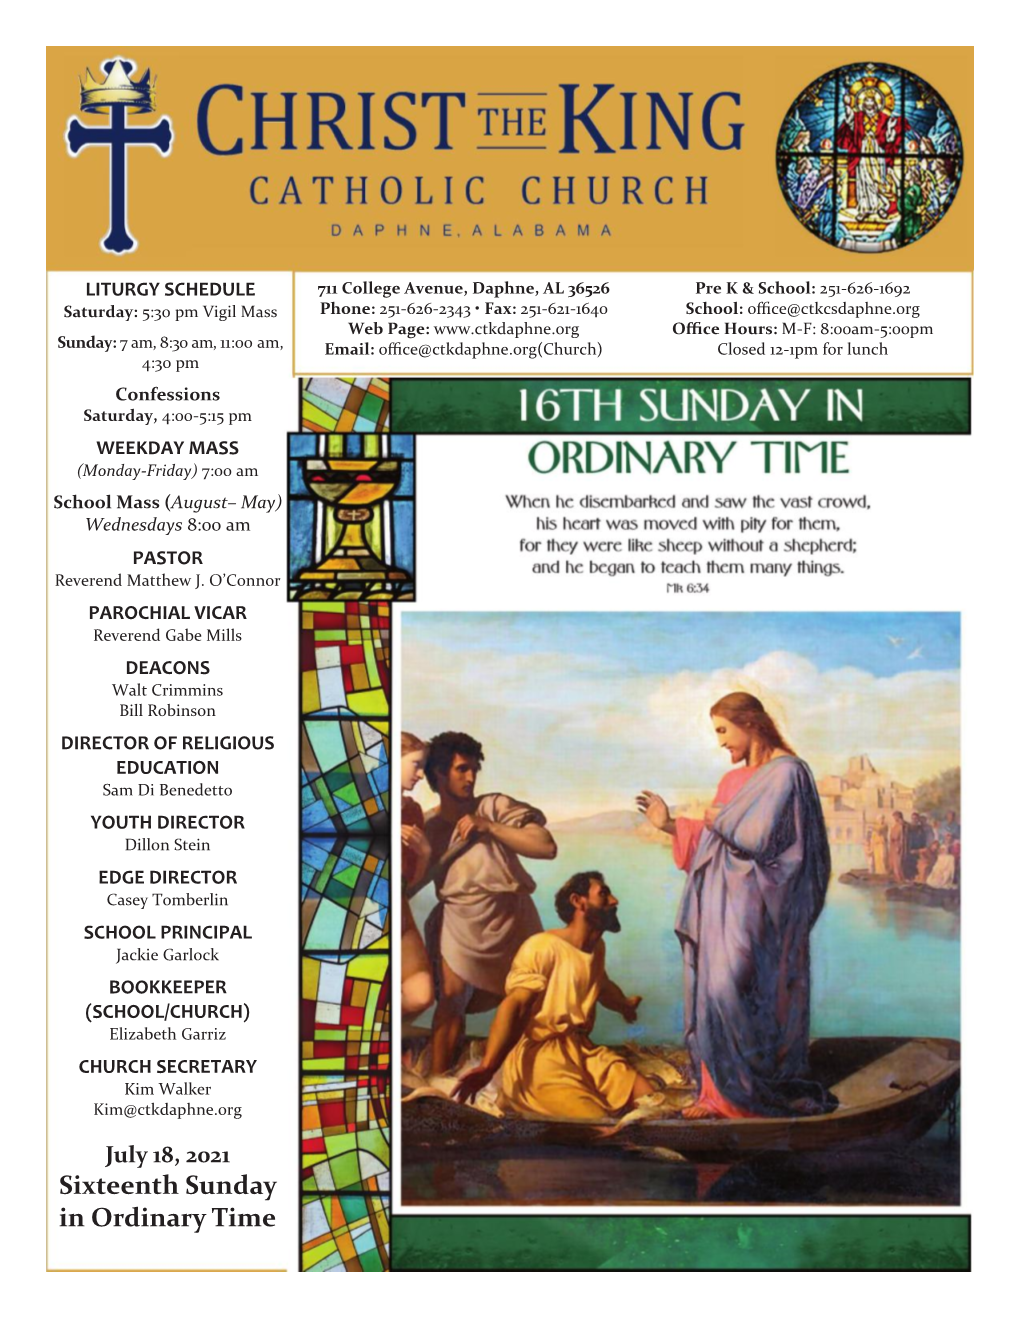 July 18, 2021 Sixteenth Sunday in Ordinary Time in OUR PARISH